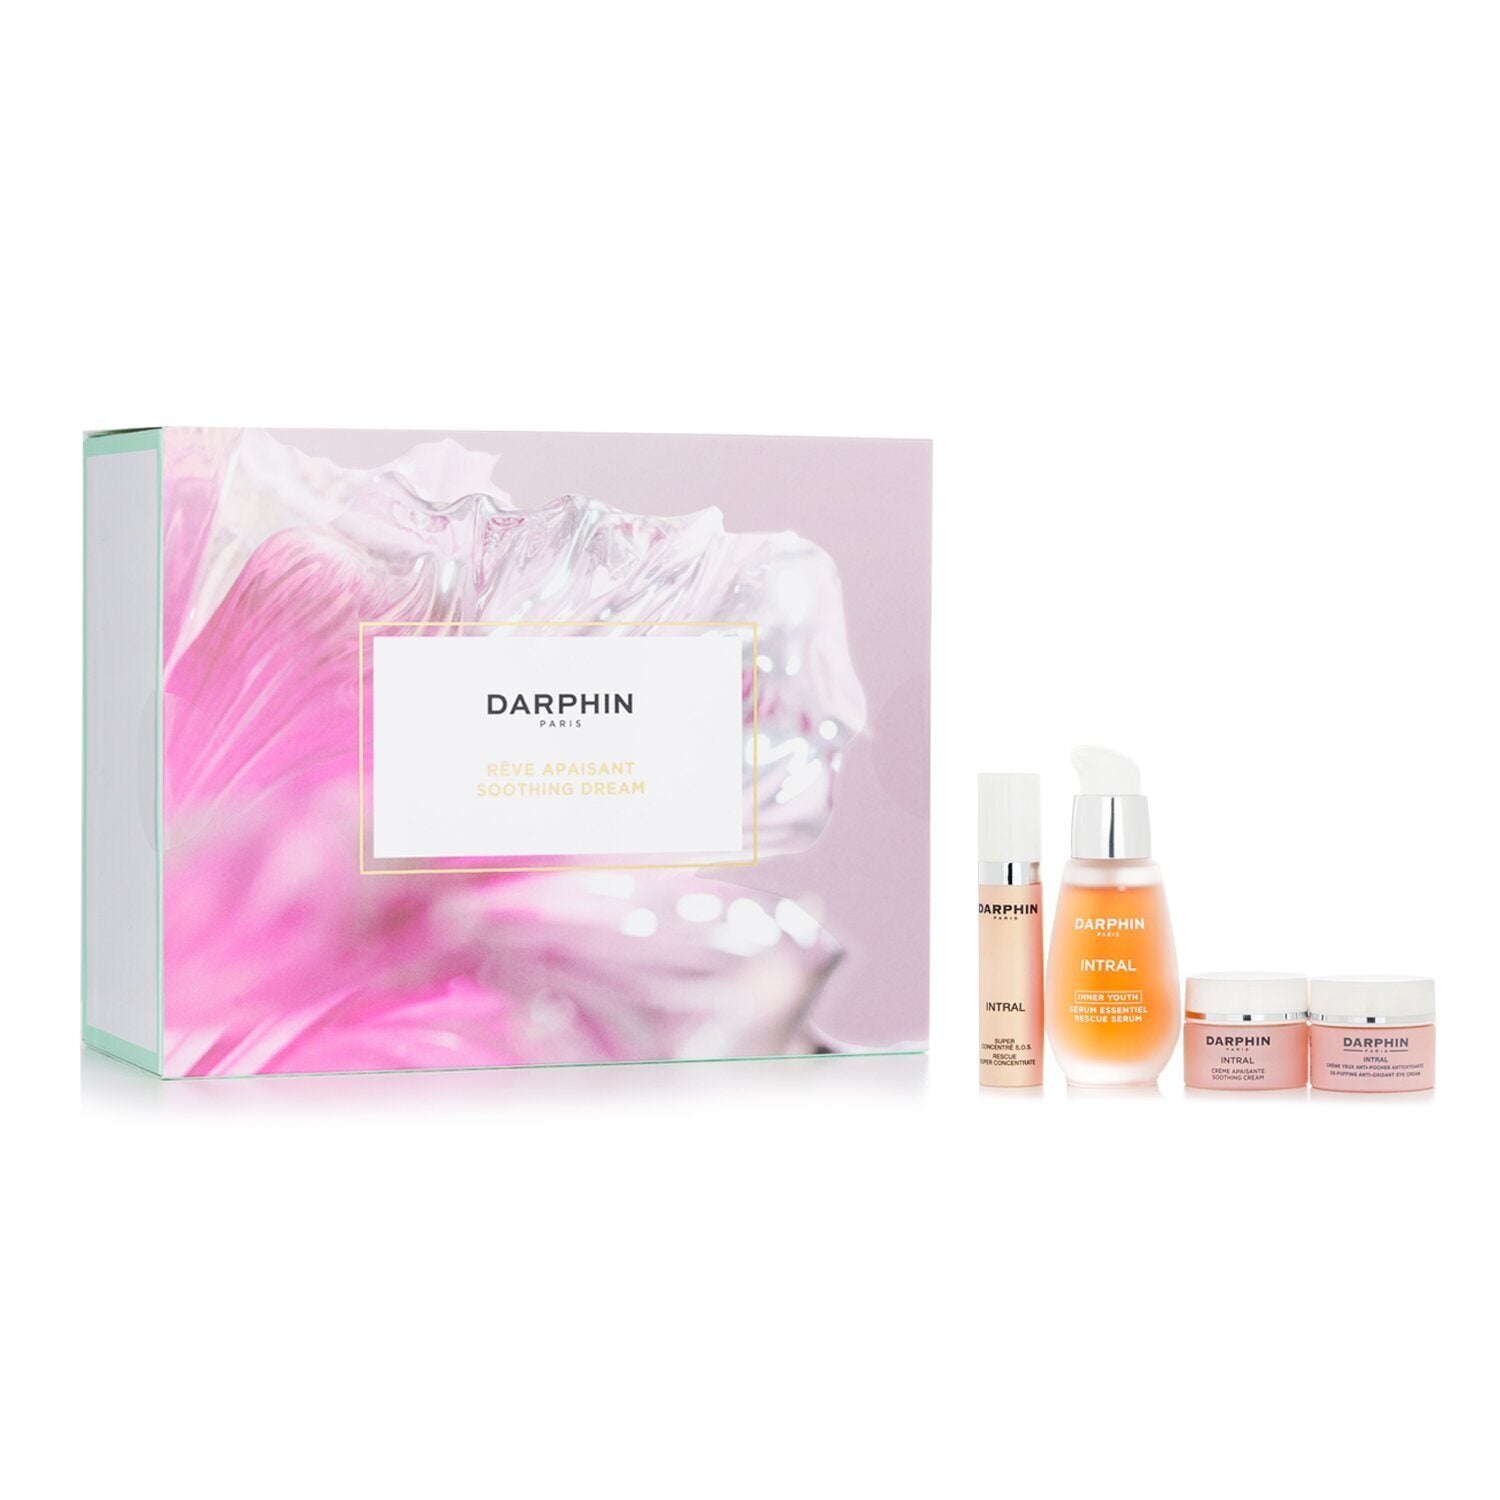 DARPHIN-Soothing Dream Set: Youth Rescue Serum+Super Concentrate+Eye Cream+Intral Soothing Cream-4pcs 3P's Inclusive Beauty